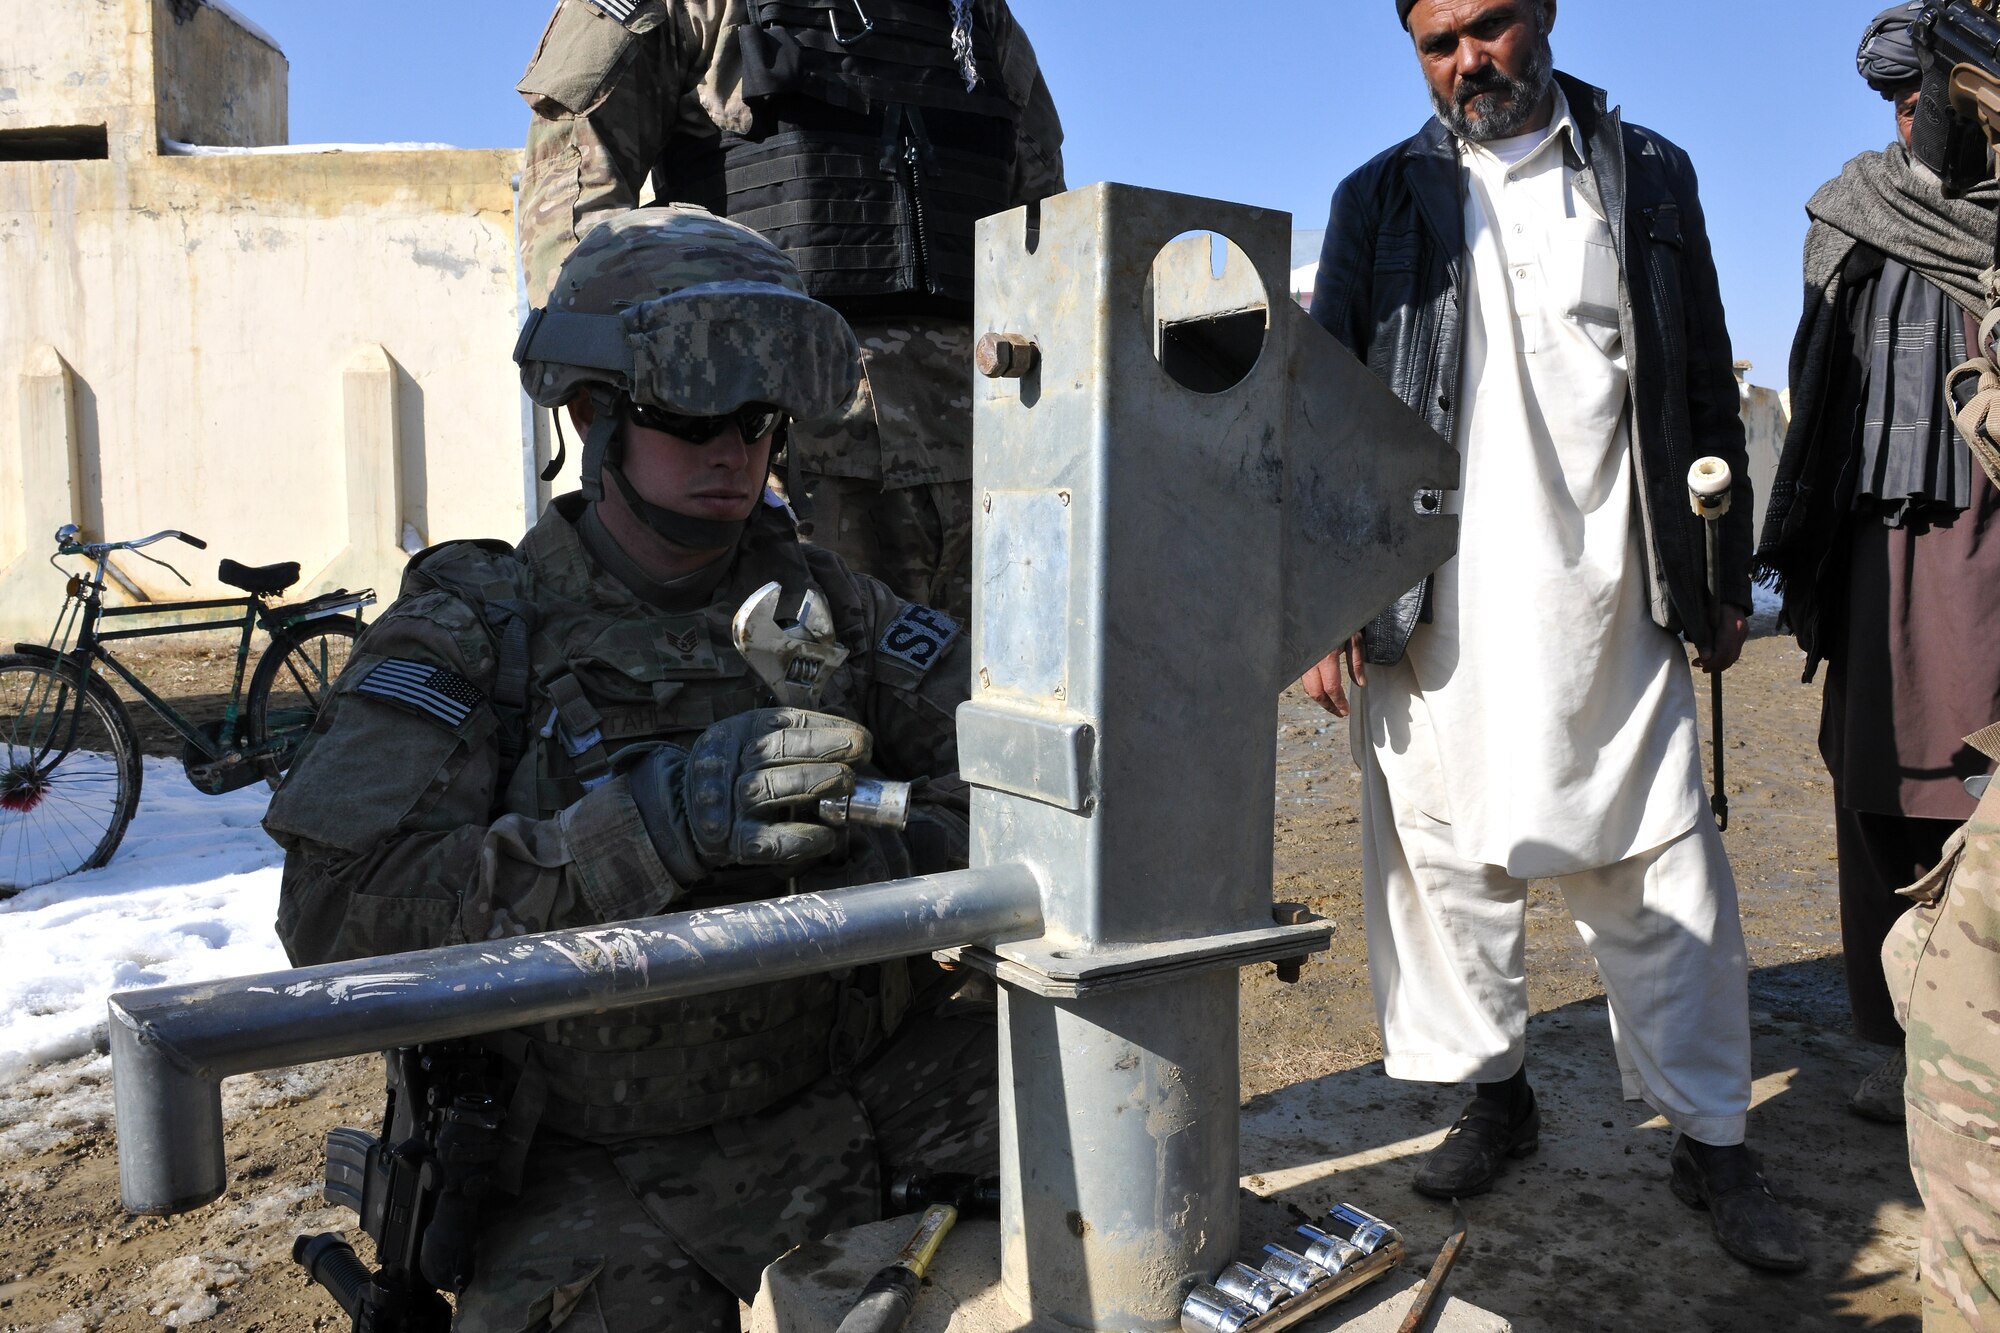 Members of the 777th Expeditionary Prime BEEF Squadron and the 755th Expeditionary Security Forces Squadron work on a broken water well located in a village near Bagram Airfield, Afghanistan, Jan. 26, 2013. Most of the local villages’ water well problems can be solved with a simple repair, cleaning, or redevelopment. (U.S. Air Force photo/Senior Airman Chris Willis)
